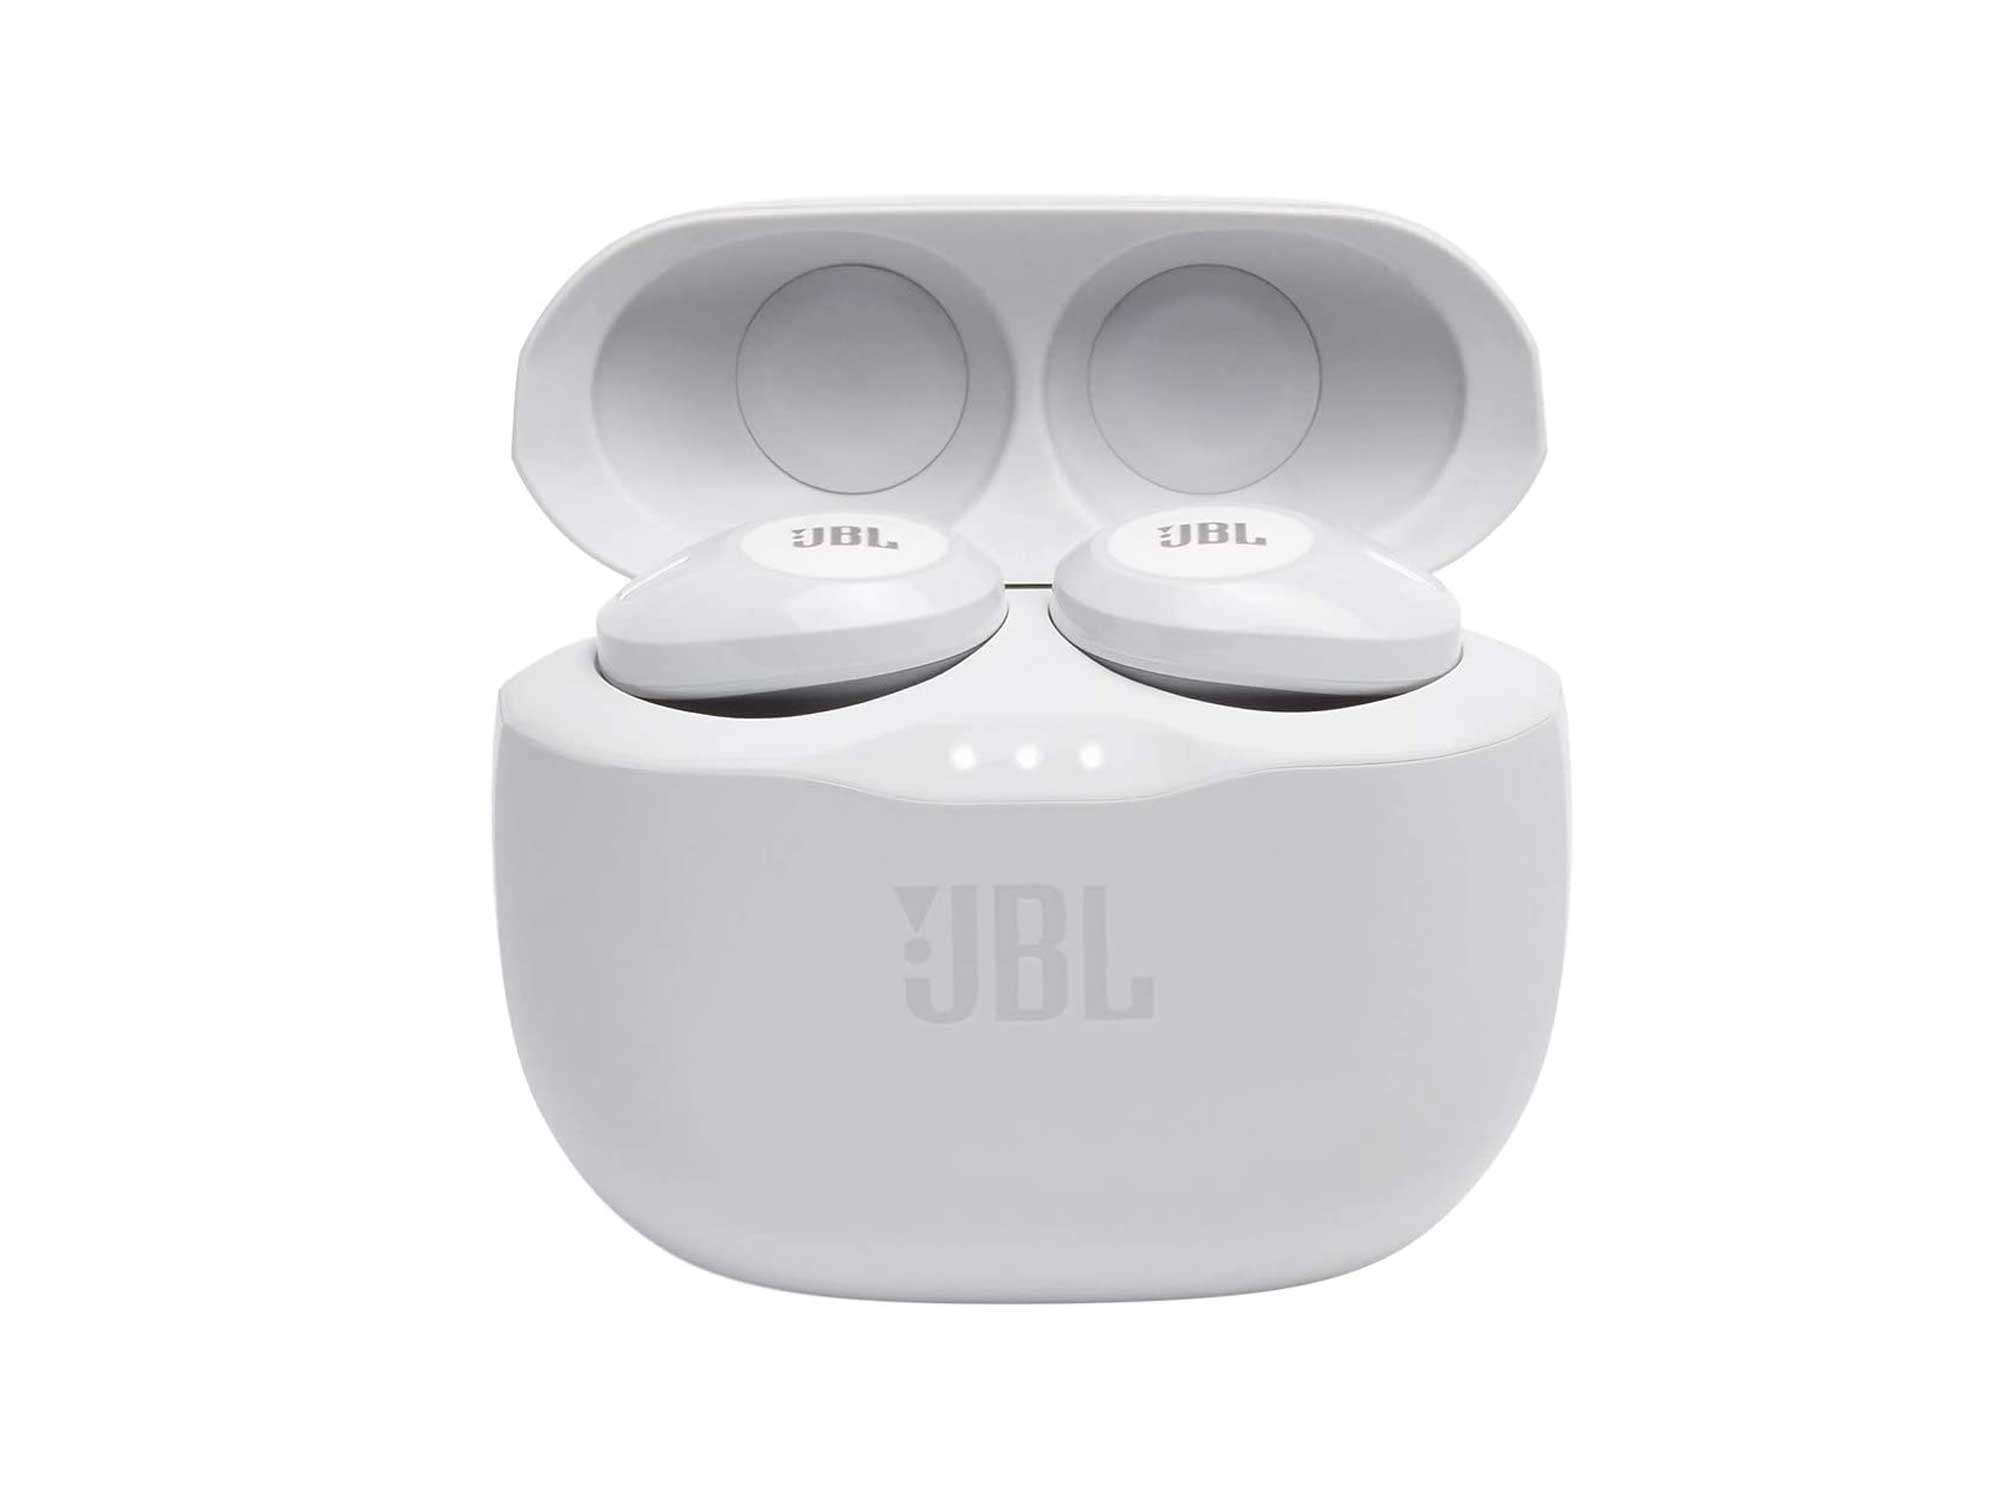 JBL Tune 125TWS True Wireless In-Ear Headphones - JBL Pure Bass Sound, 32H Battery, Bluetooth, Fast Pair, Comfortable, Wireless Calls, Music, Native Voice Assistant, Android and iOs Compatible (White)